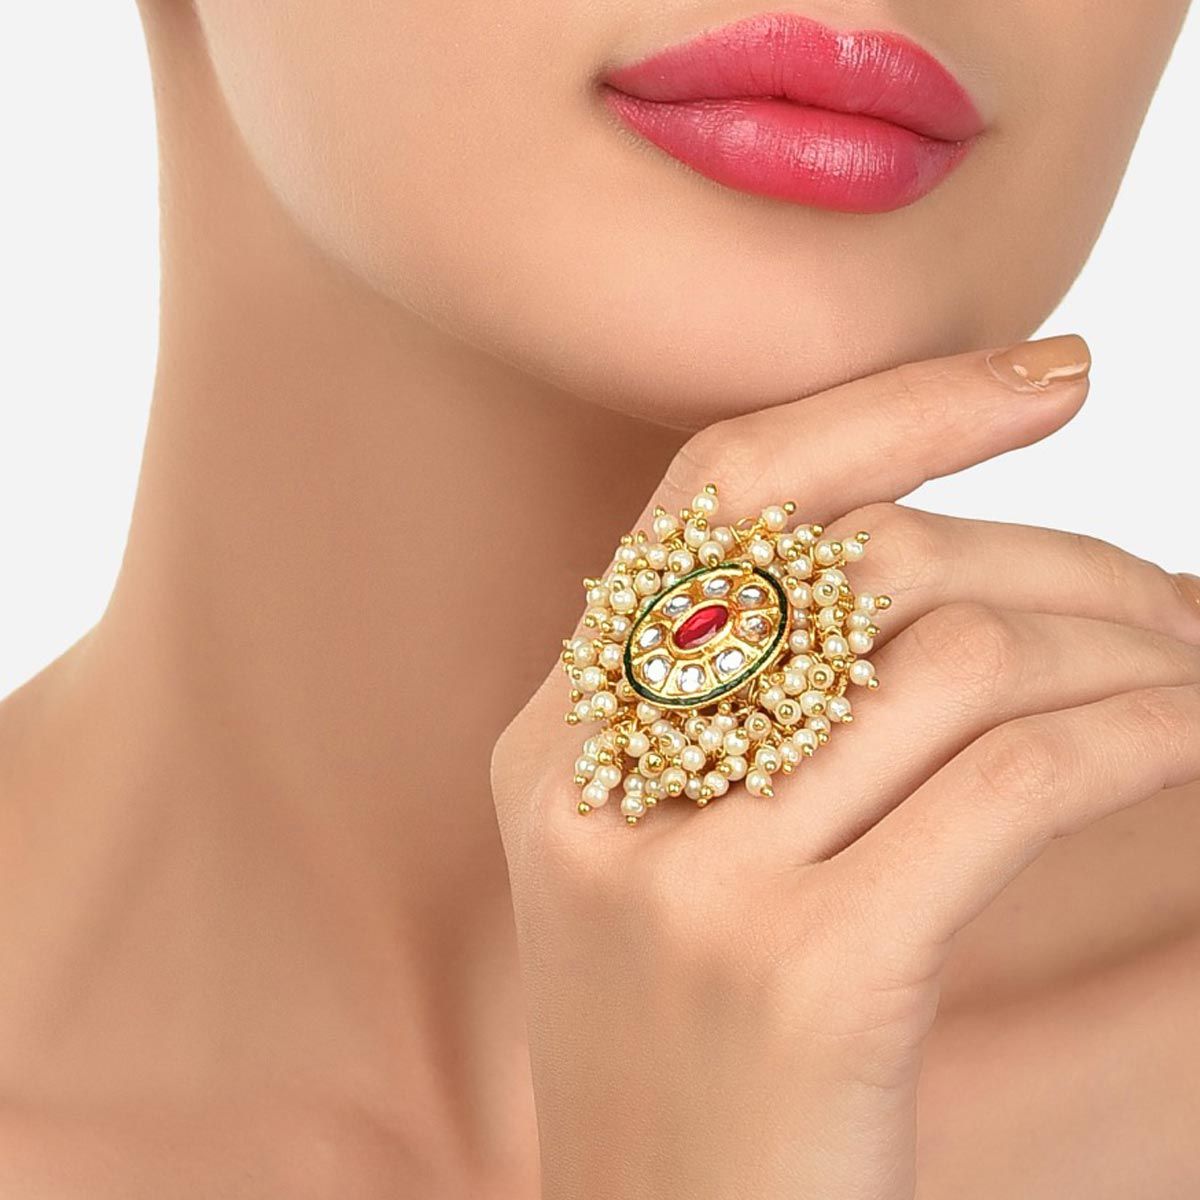 Unique Gold Beads Model Finger Rings New Fashion Big Size Antique Jewellery  F24270